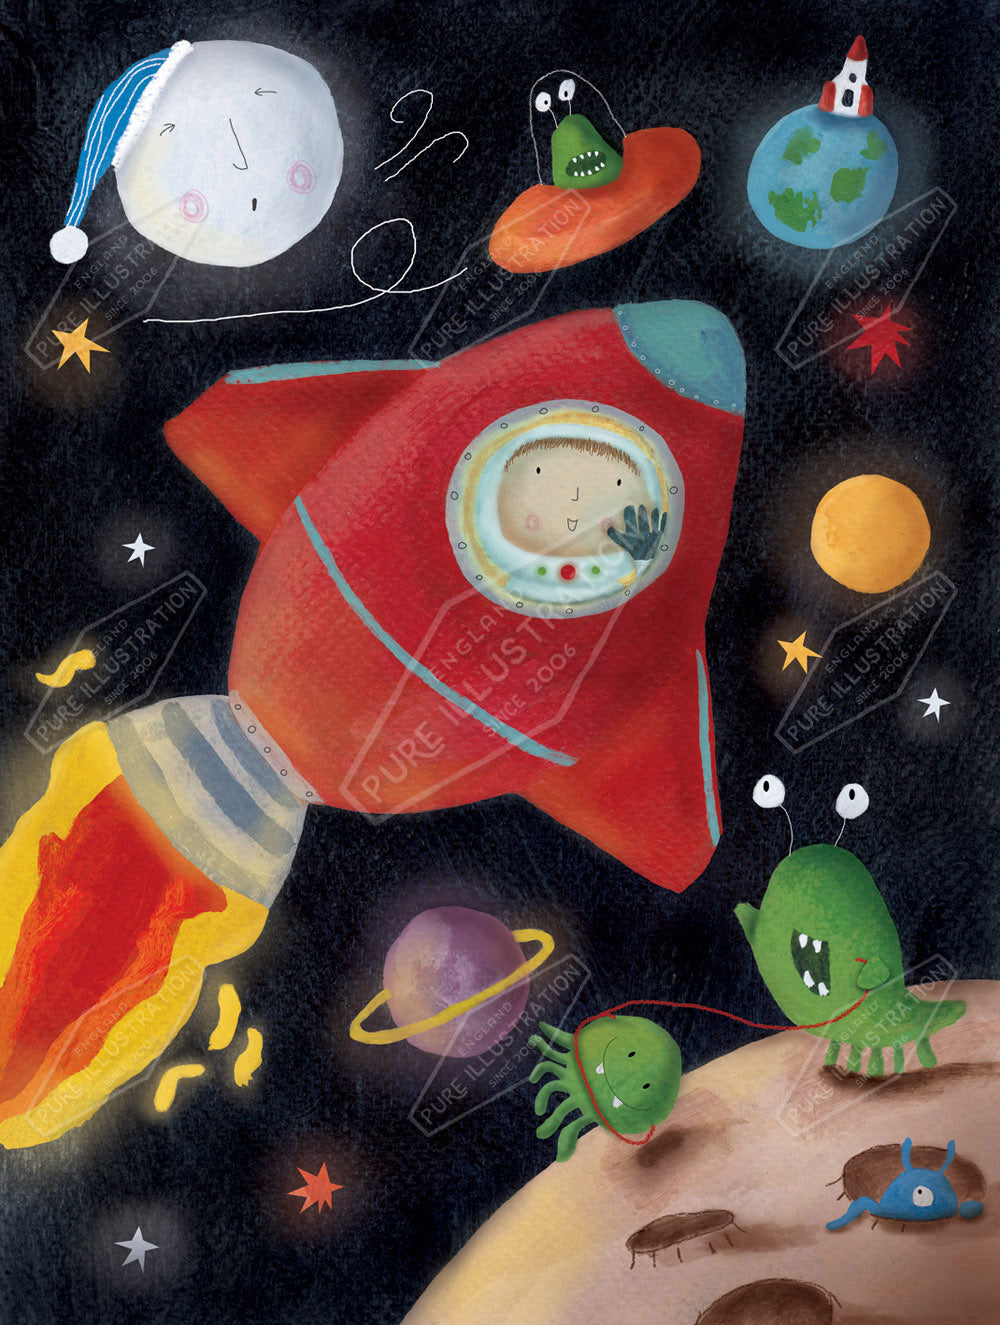 Children's Space Design by Cory Reid for Pure Art Licensing Agency & Surface Design Studio